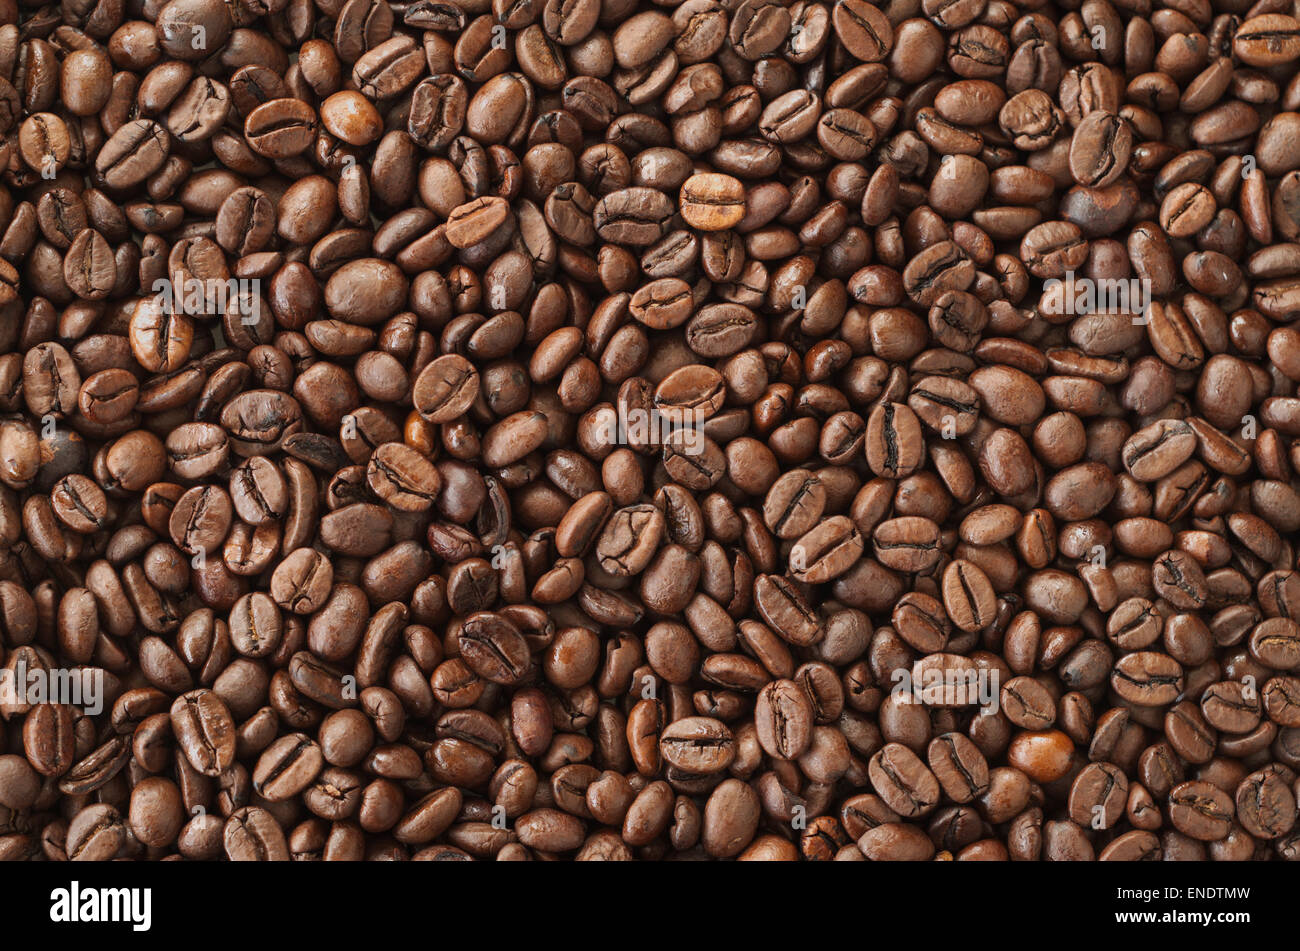 Roasted coffee beans, background texture Stock Photo